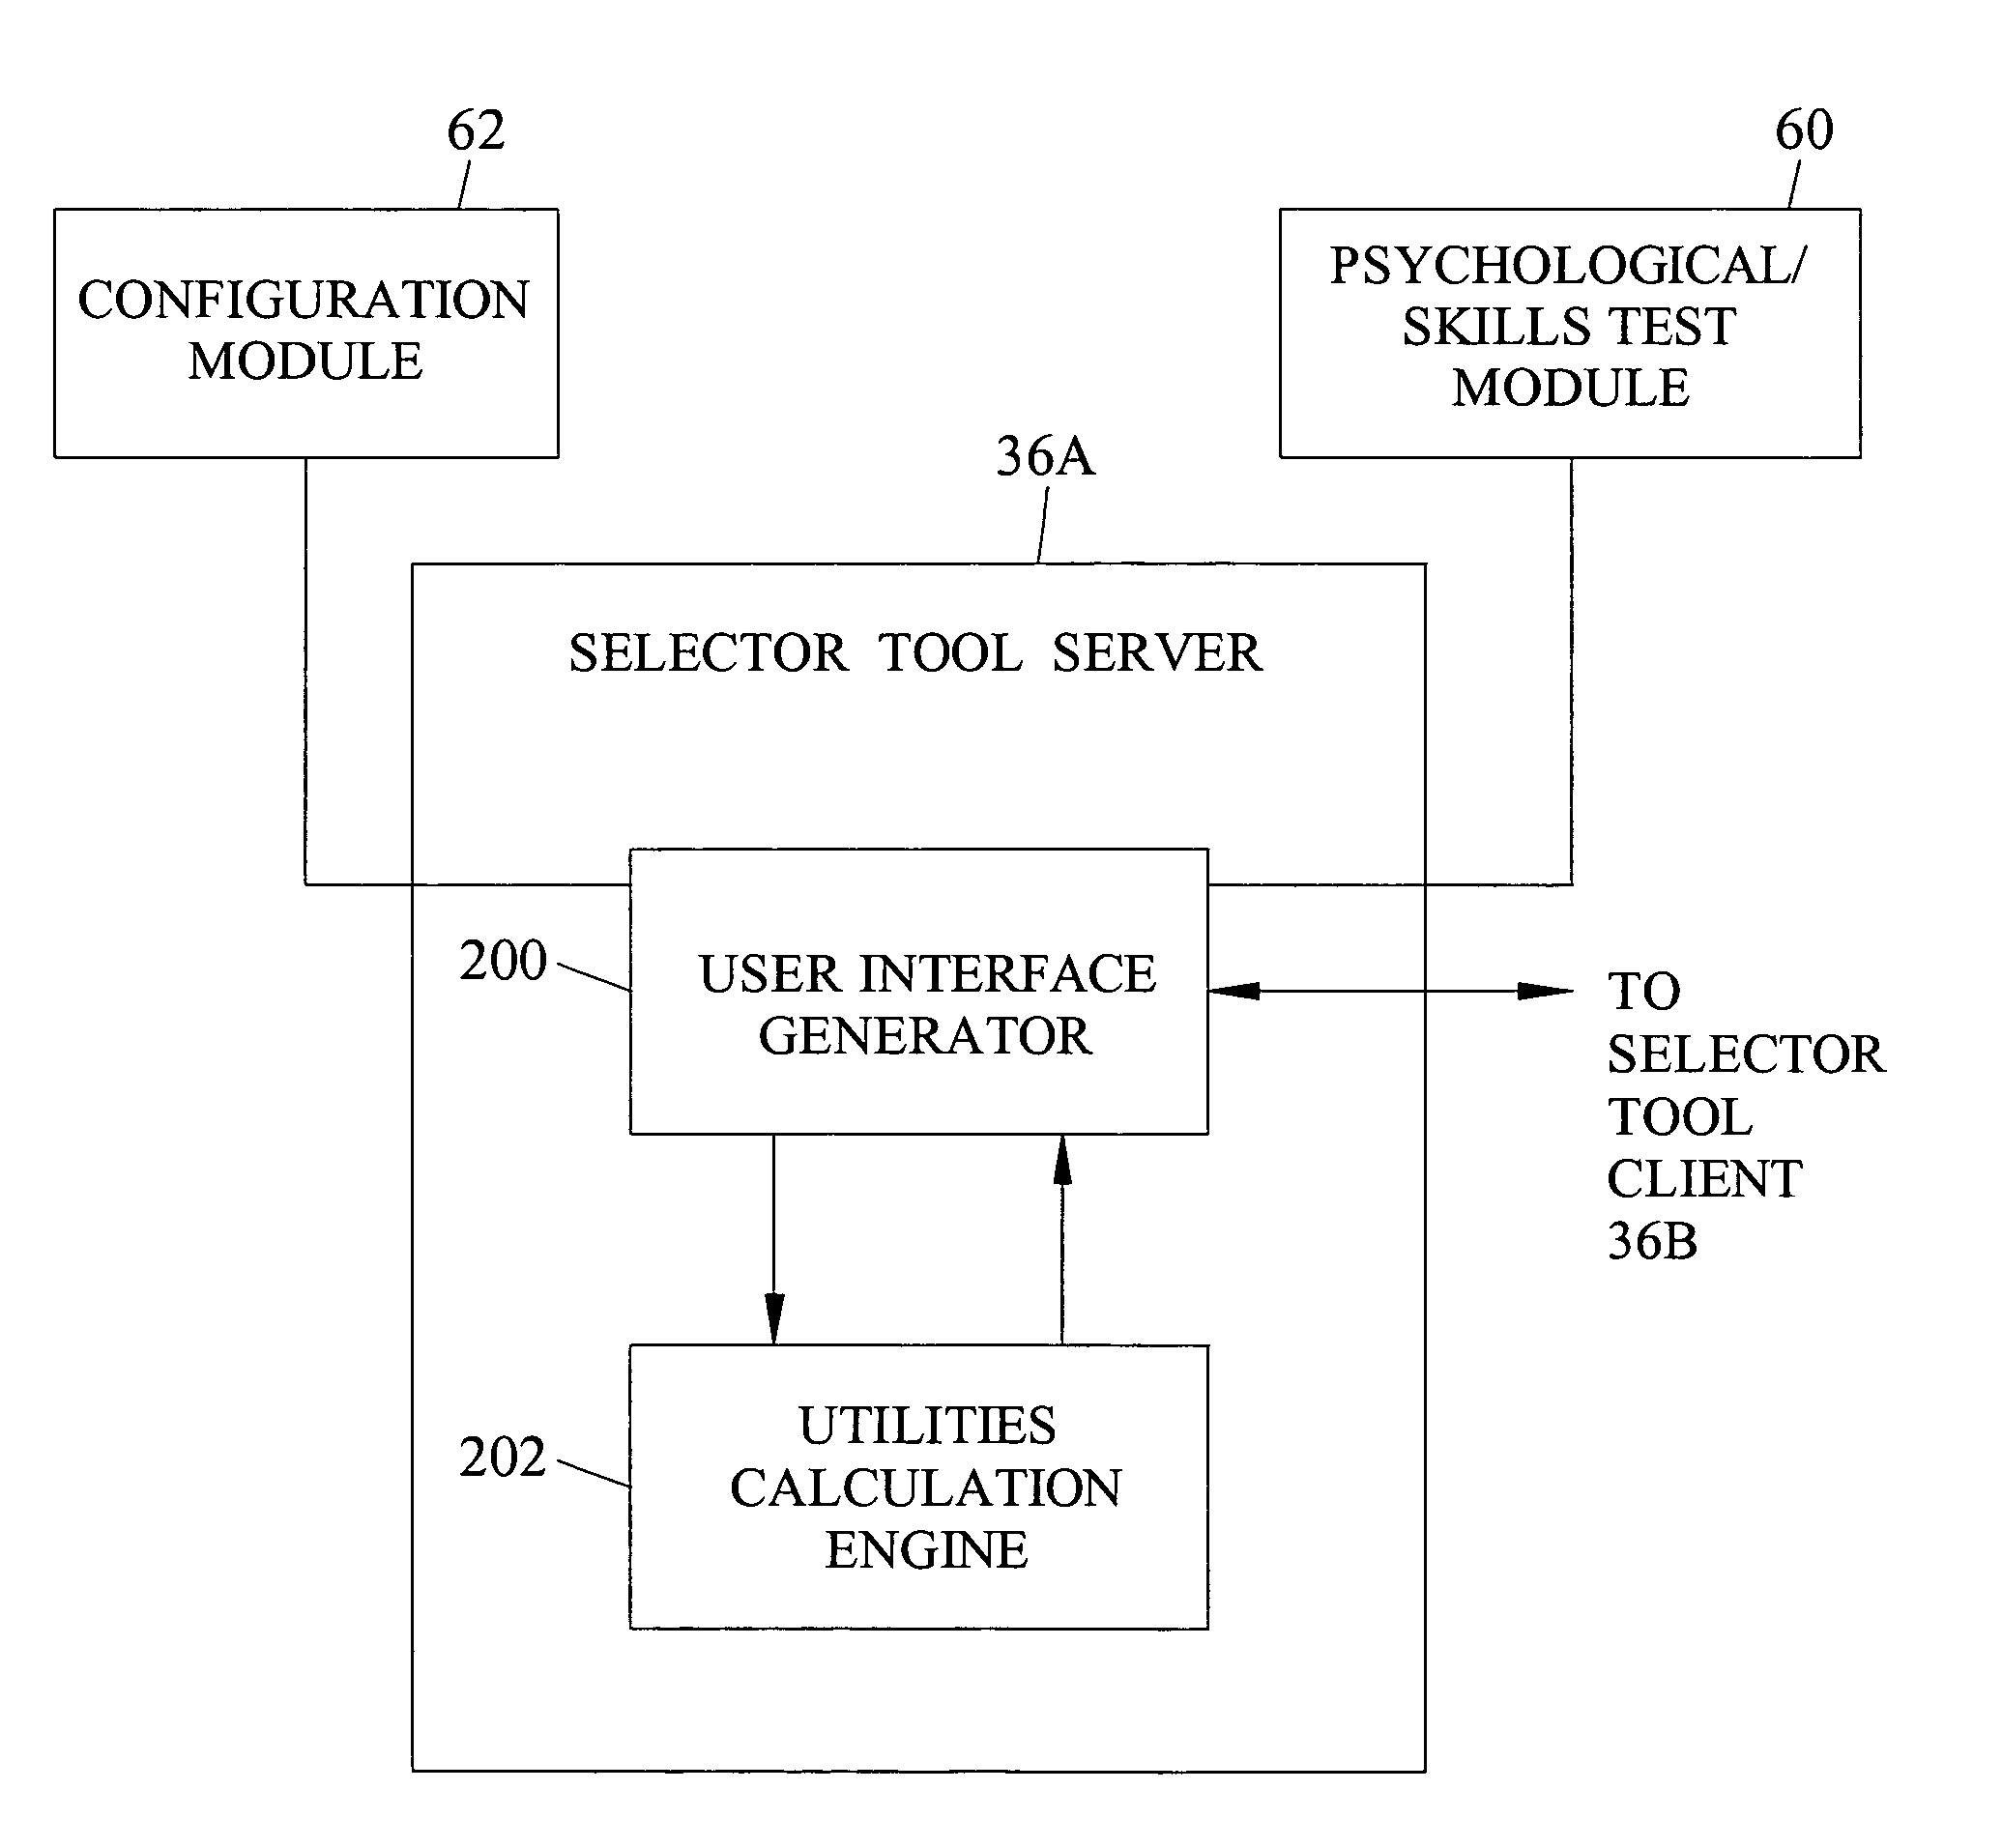 Methods, systems, and computer program products for facilitating user choices among complex alternatives using conjoint analysis in combination with psychological tests, skills tests, and configuration software